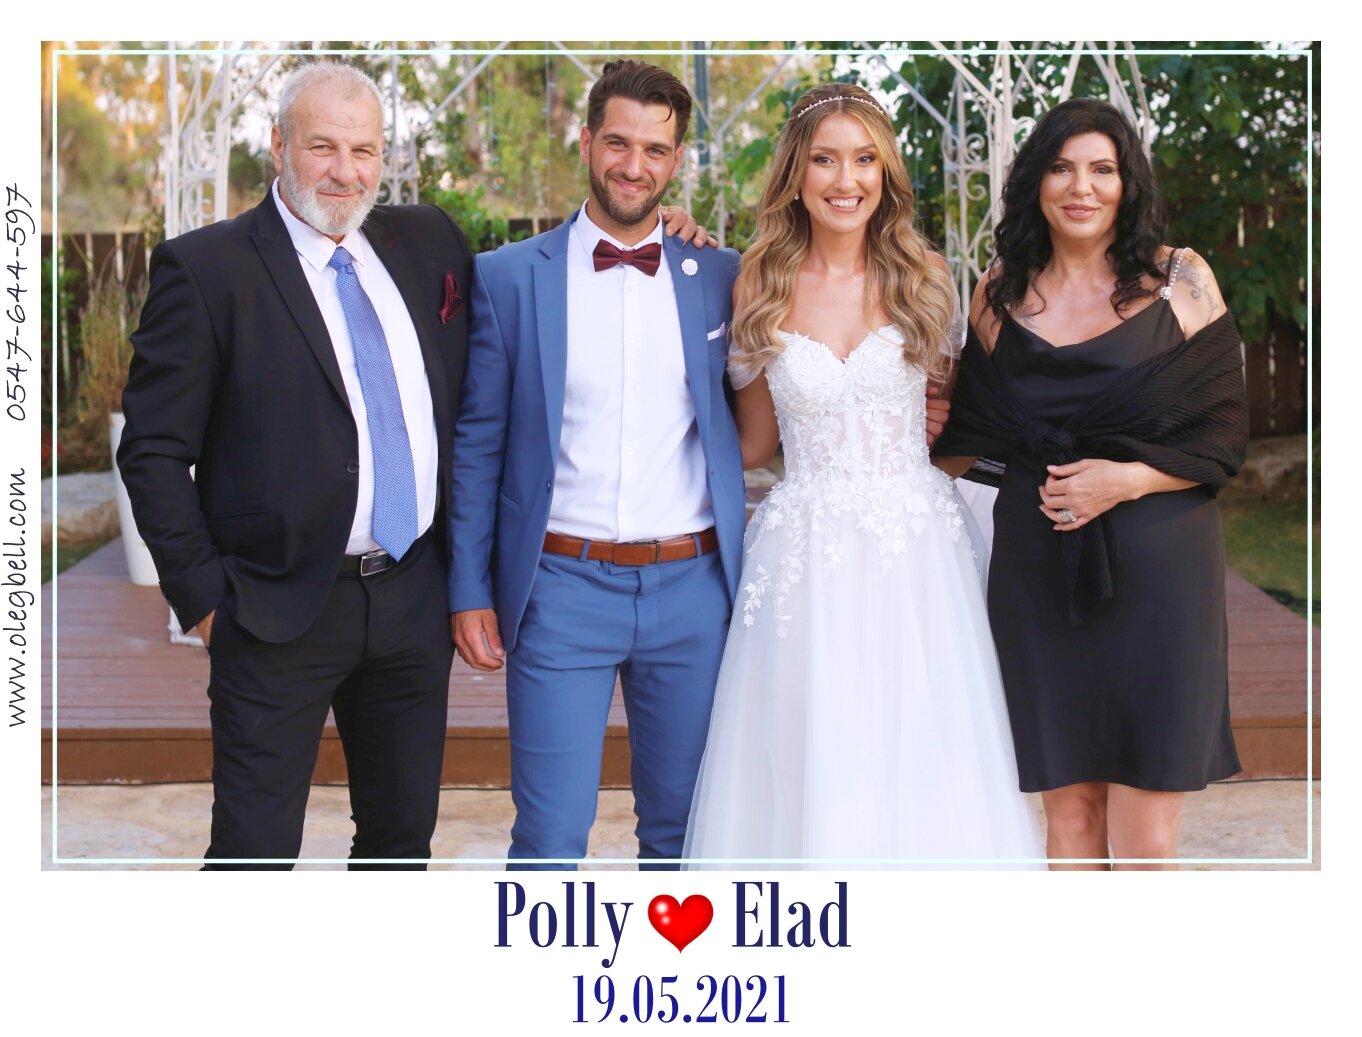 POLLY_AND_ELAD_WD_MG_SITE_006.JPG